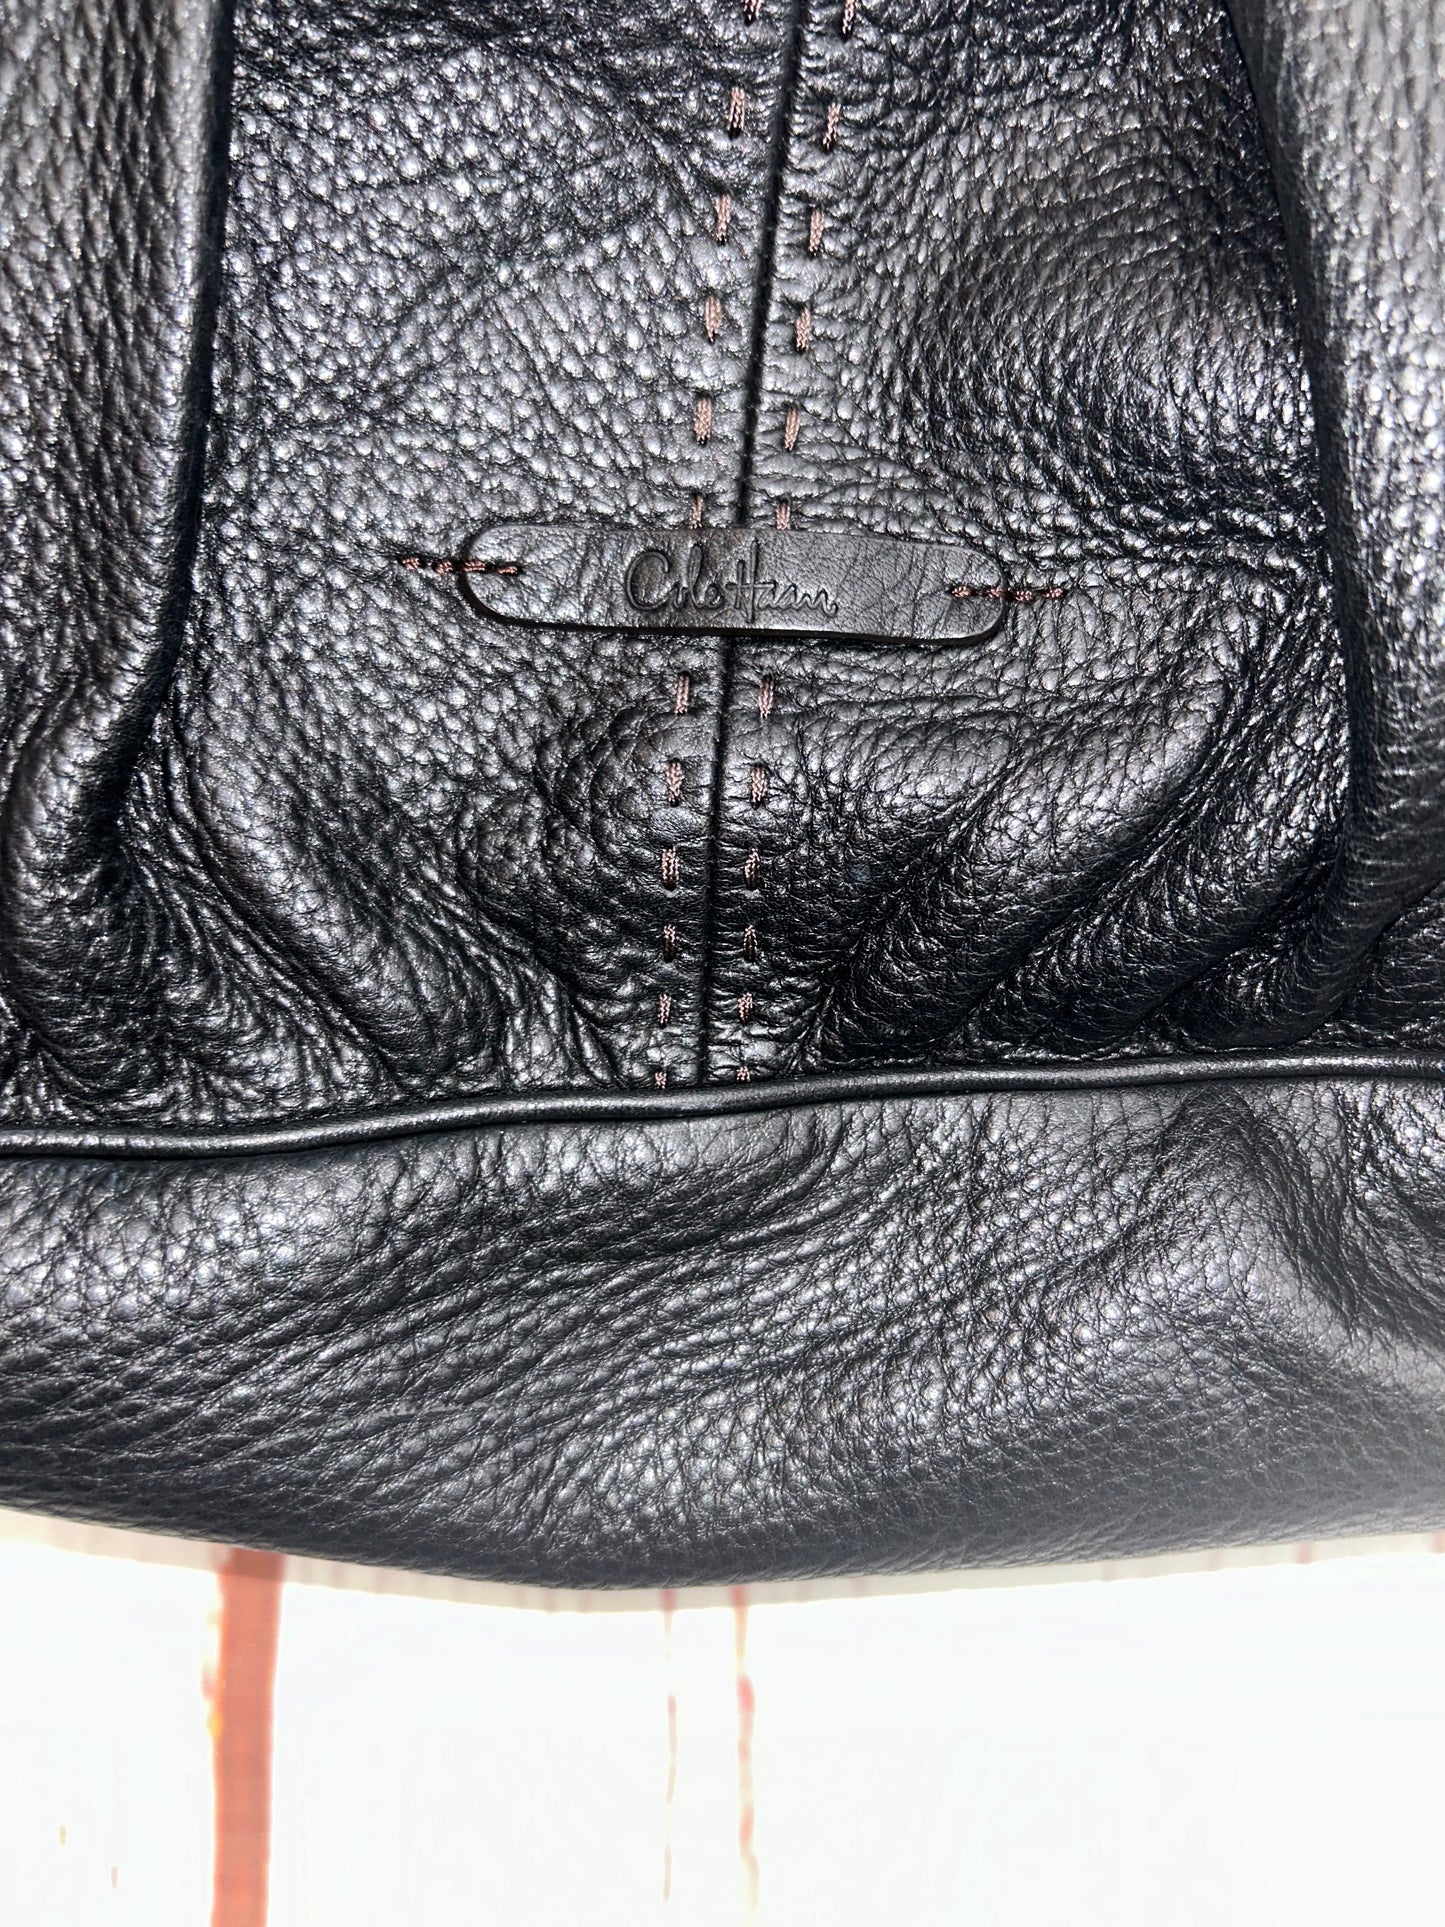 Handbag Leather By Cole-haan  Size: Large